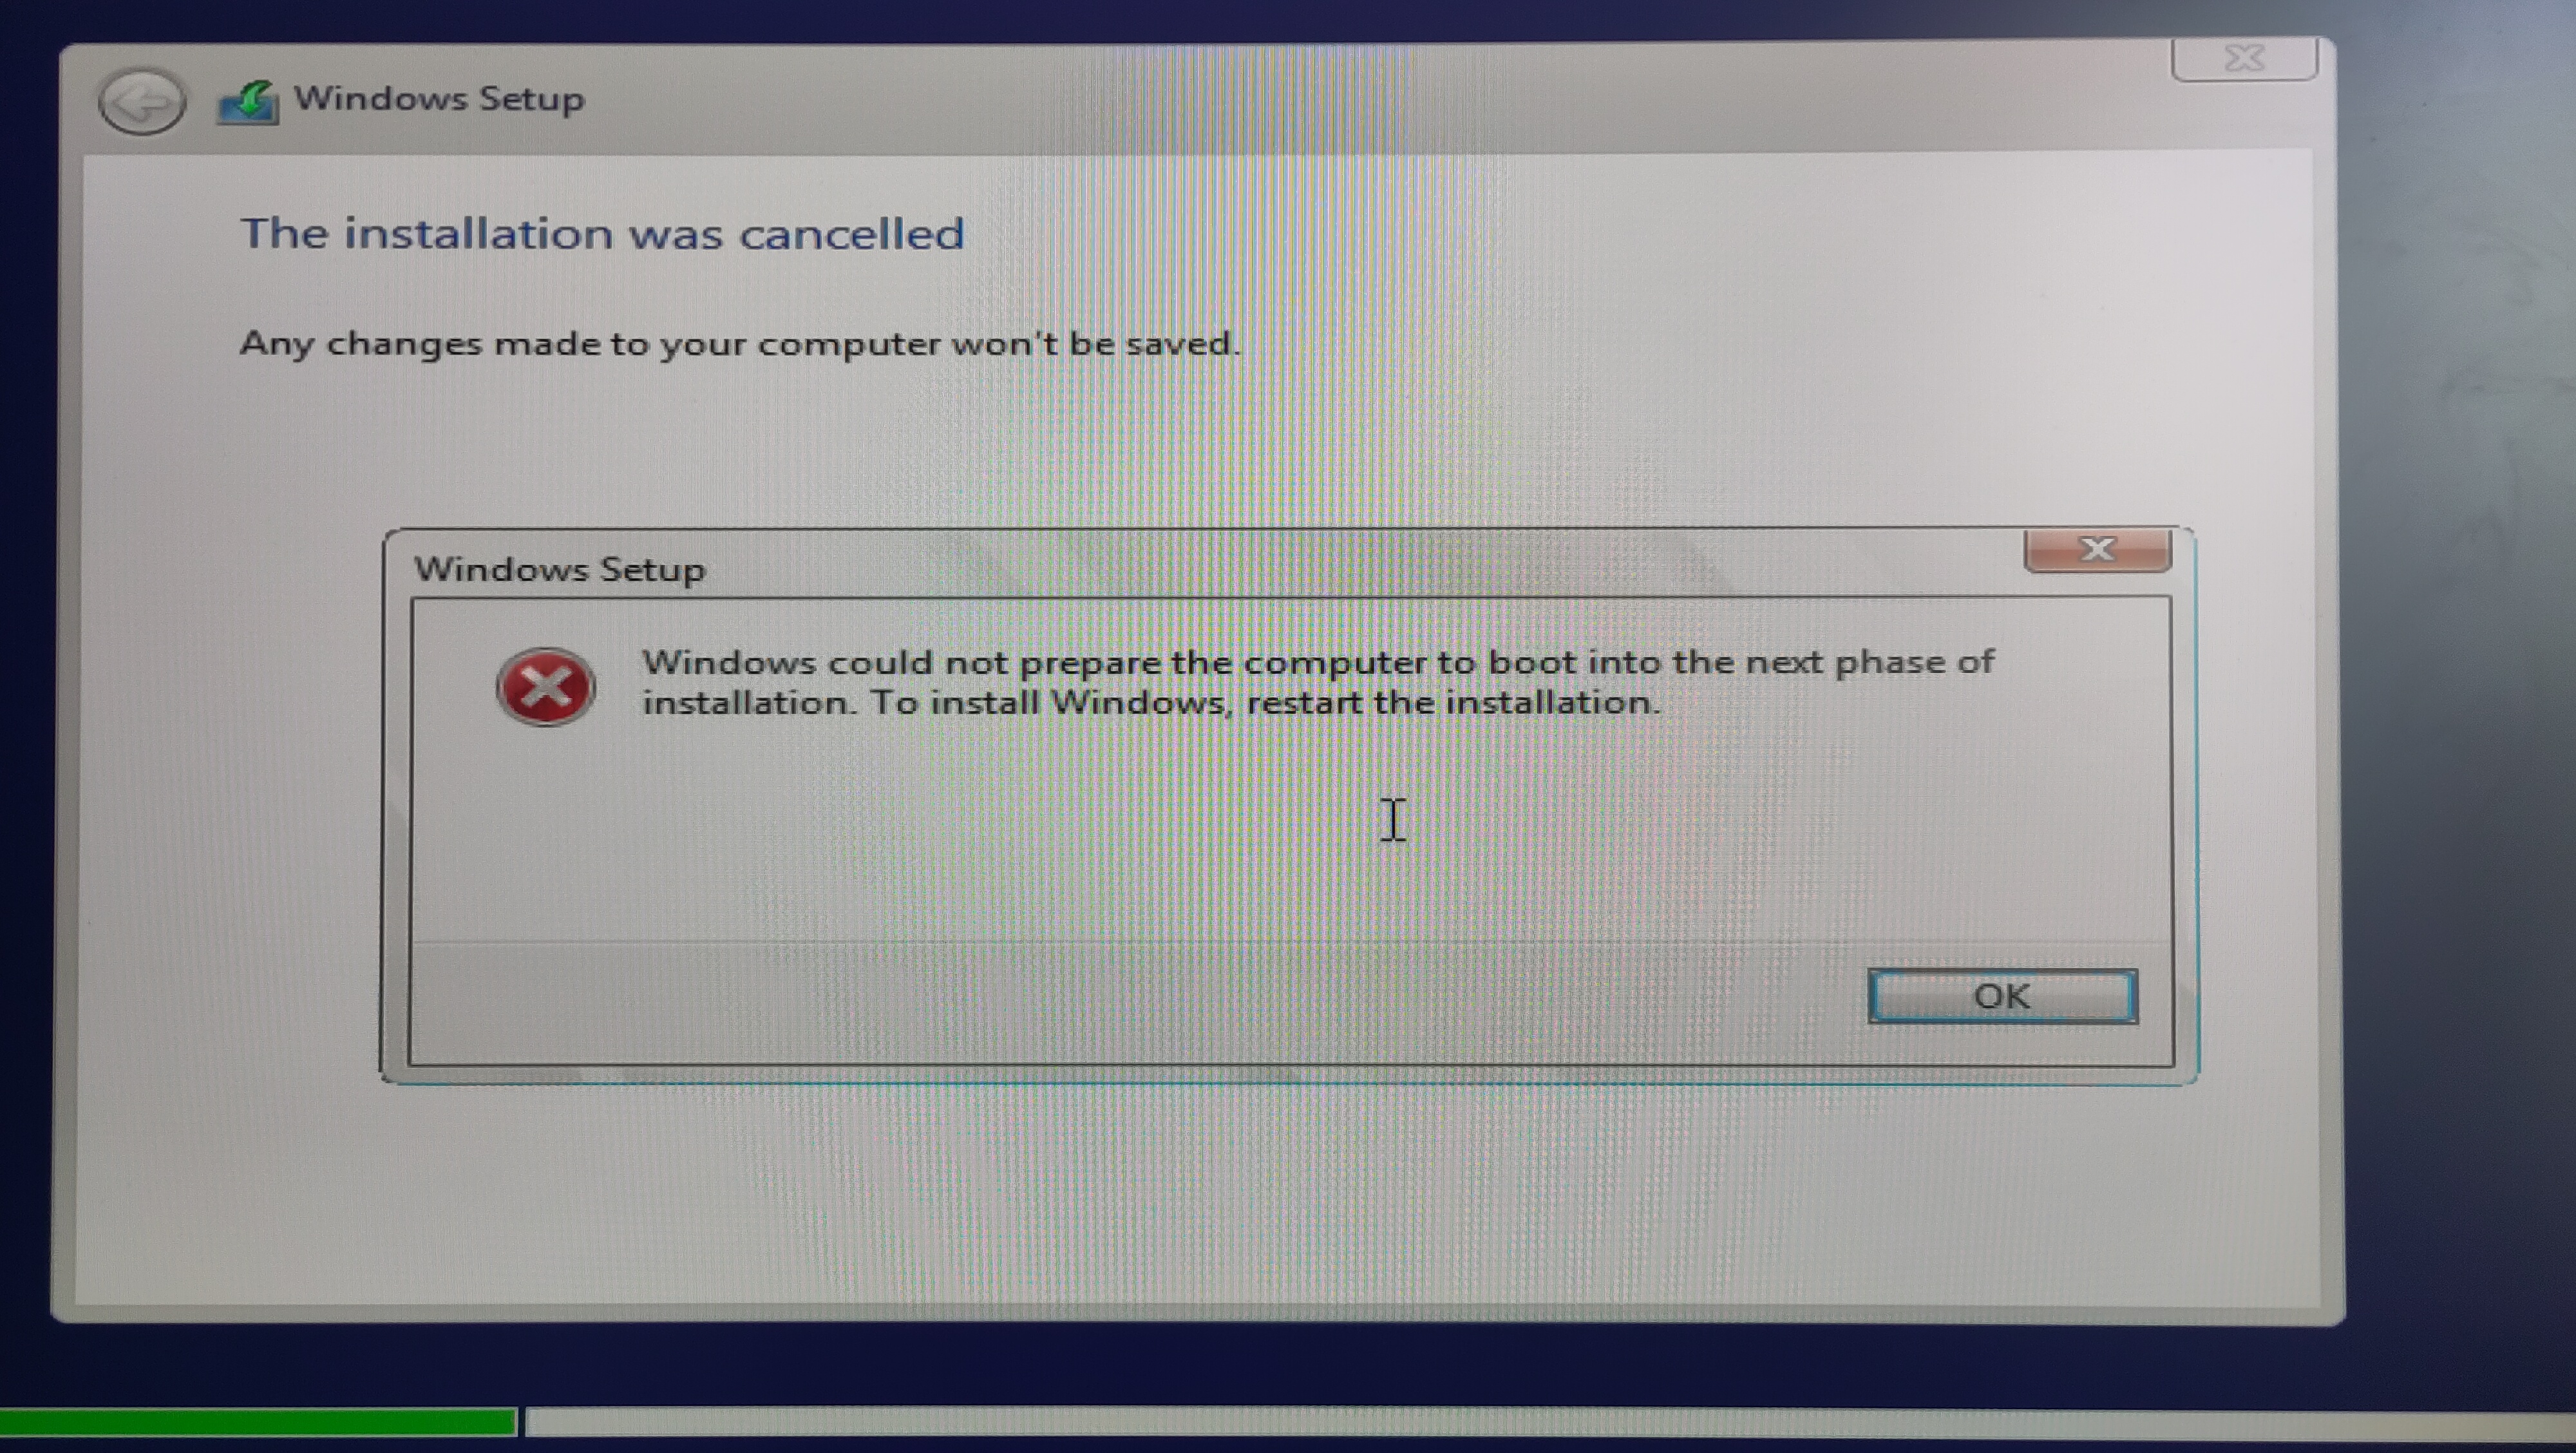 Windows installer error: Windows could not prepare the computer to boot into the next phase of installation